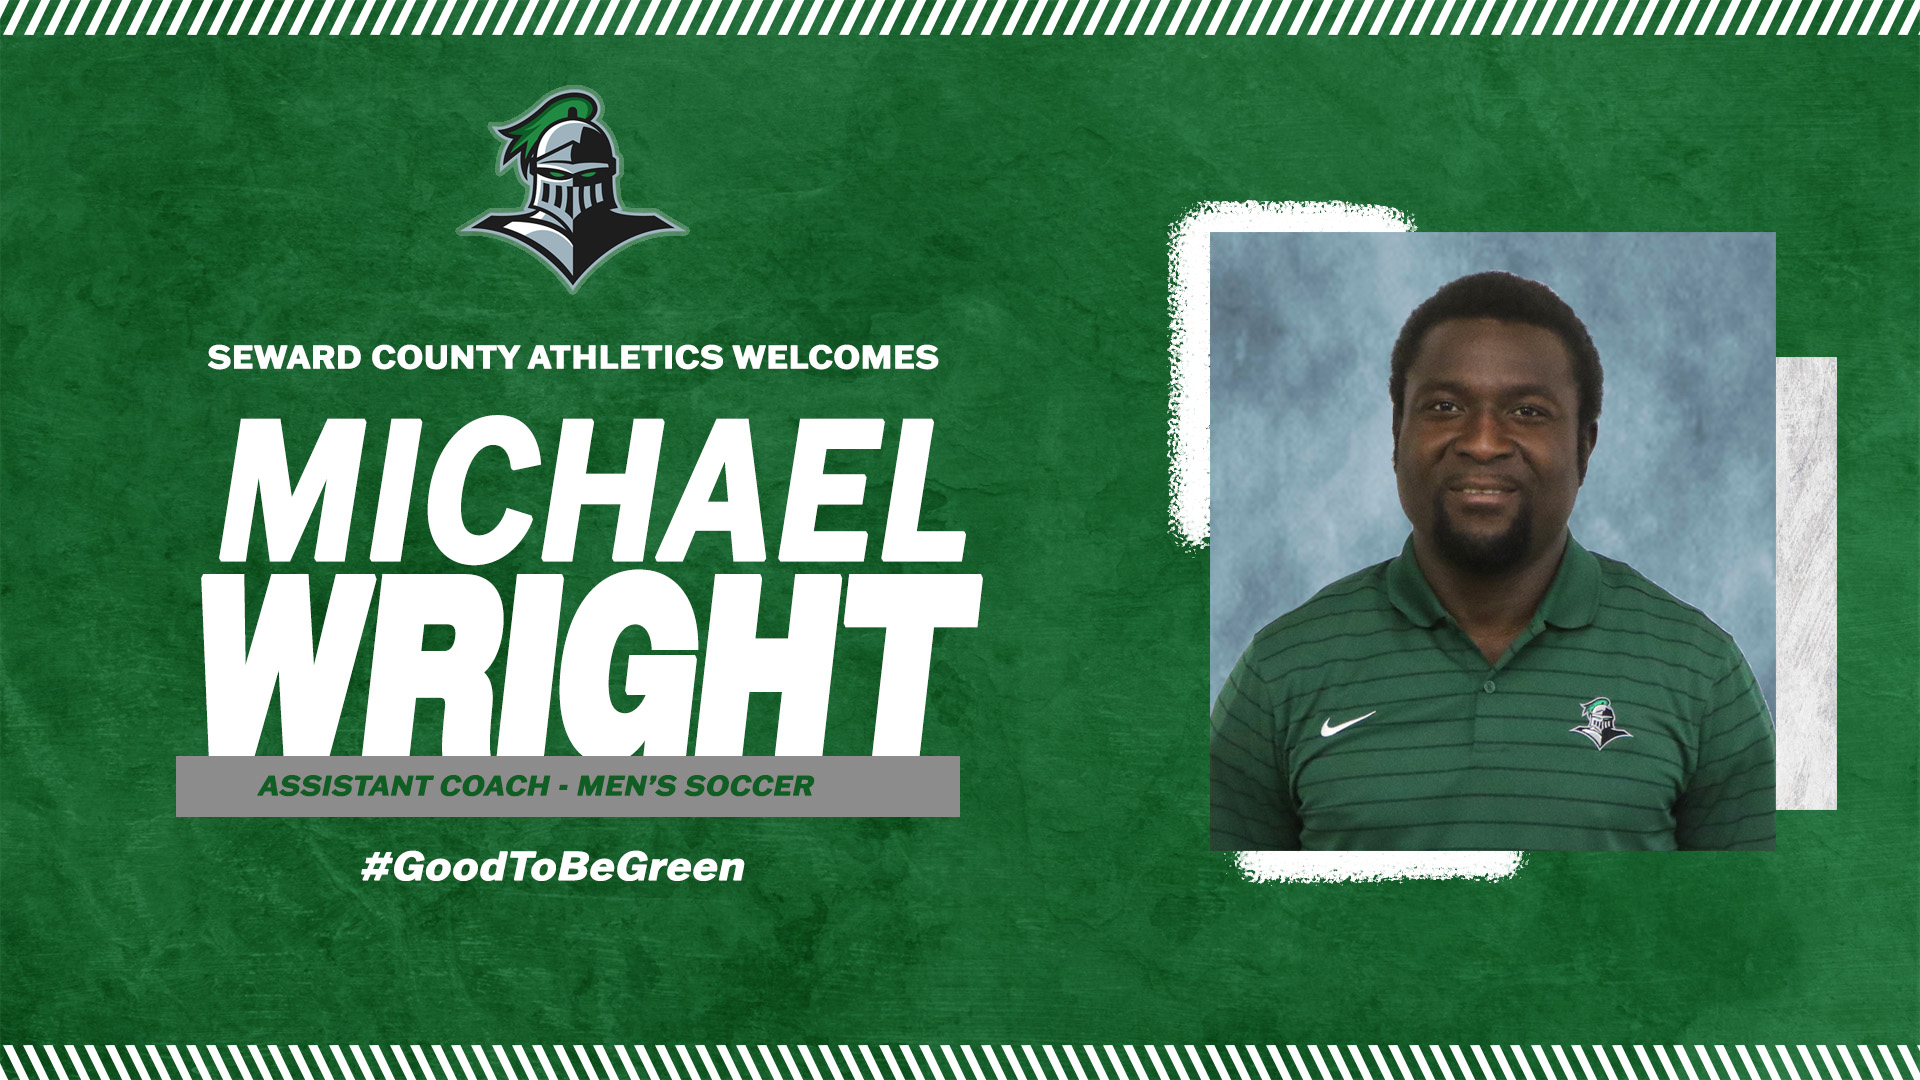 Michael Wright is First Seward Soccer Assistant